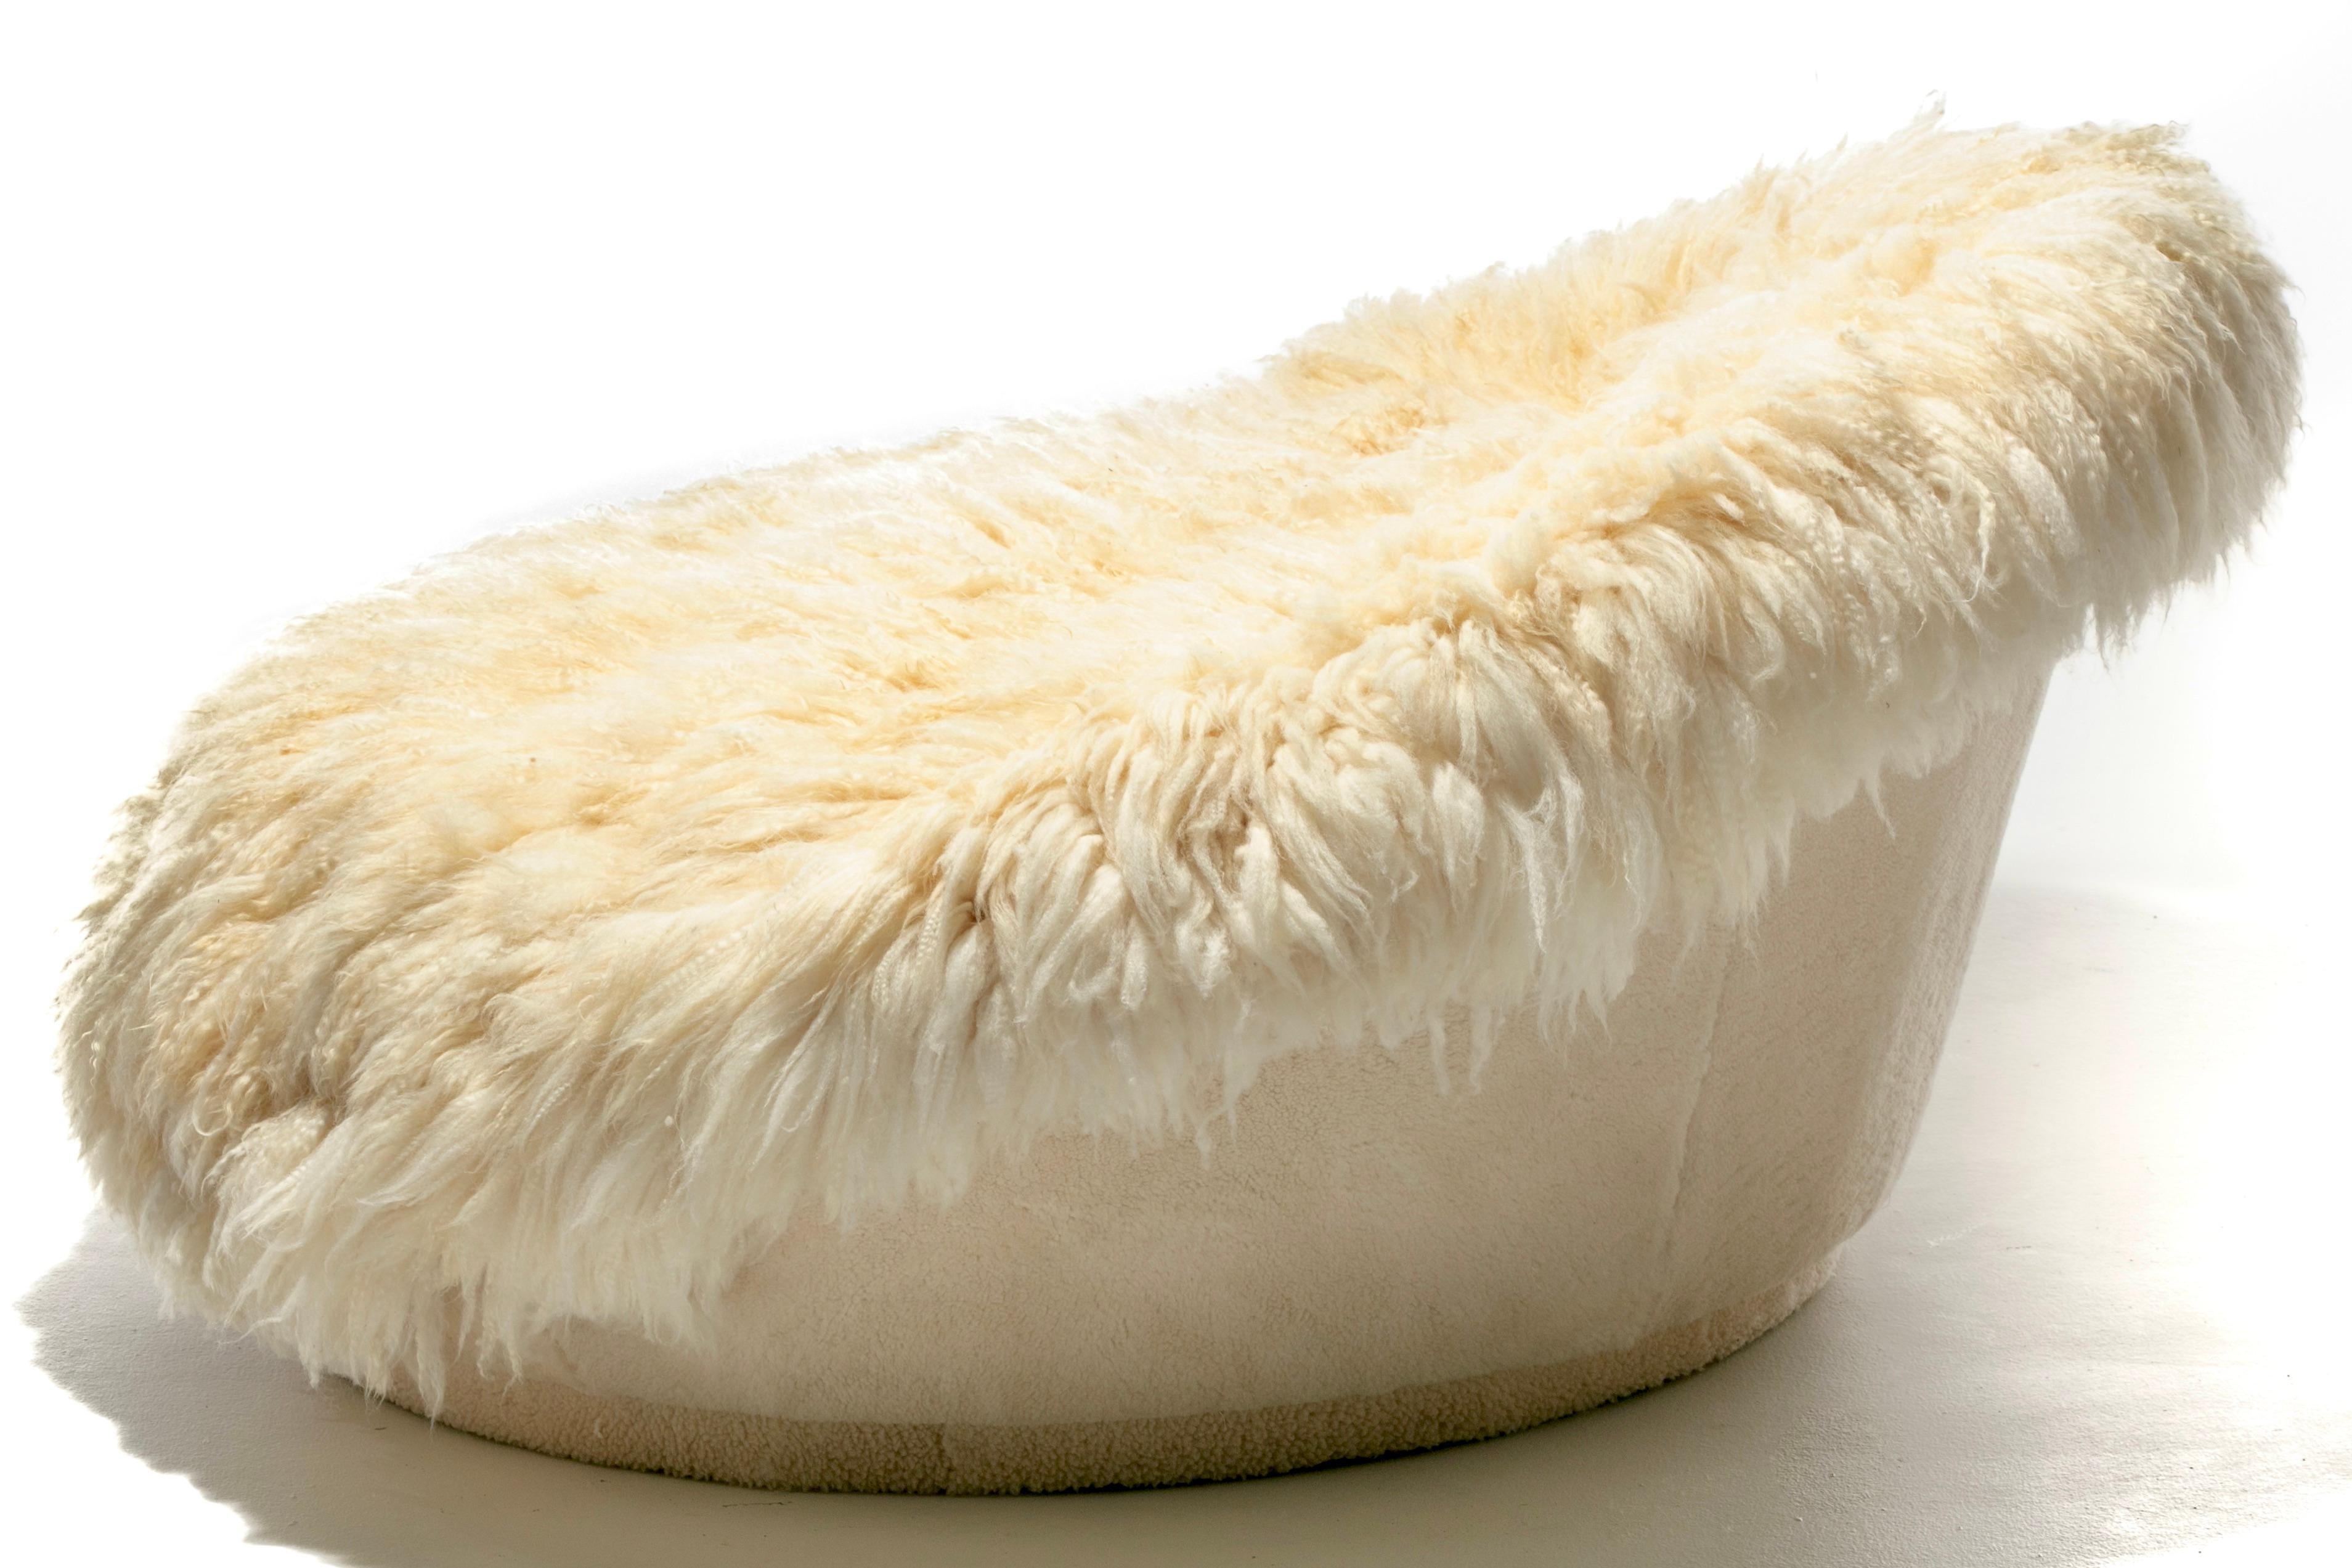 Mid-Century Modern Milo Baughman Style Satellite Lounge in Napa Valley Sheepskins & Ivory Shearling For Sale